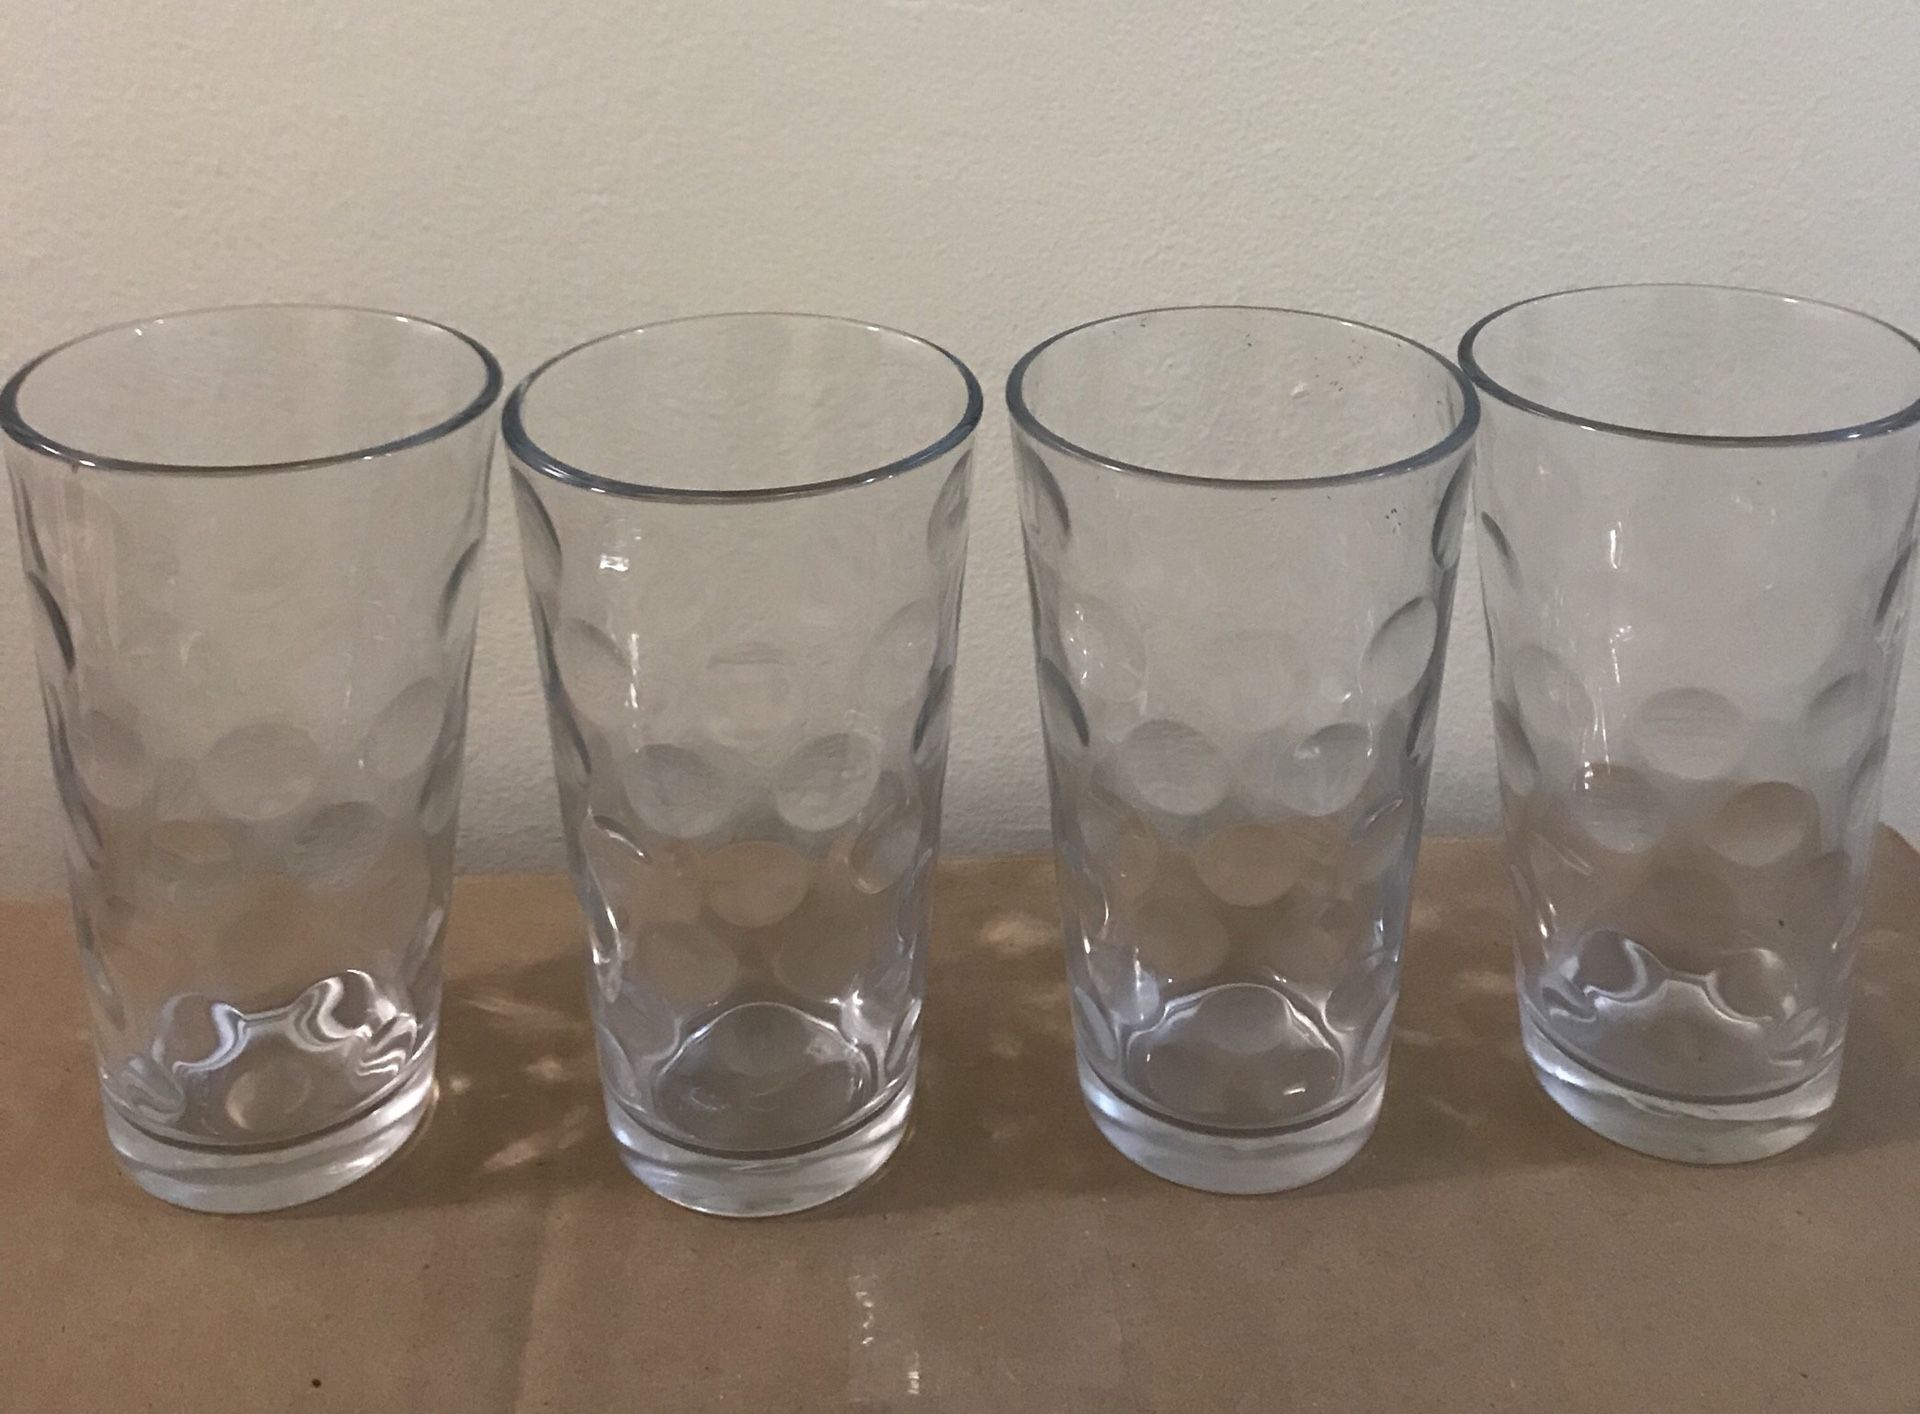 Pair of 4 Tall Glasses